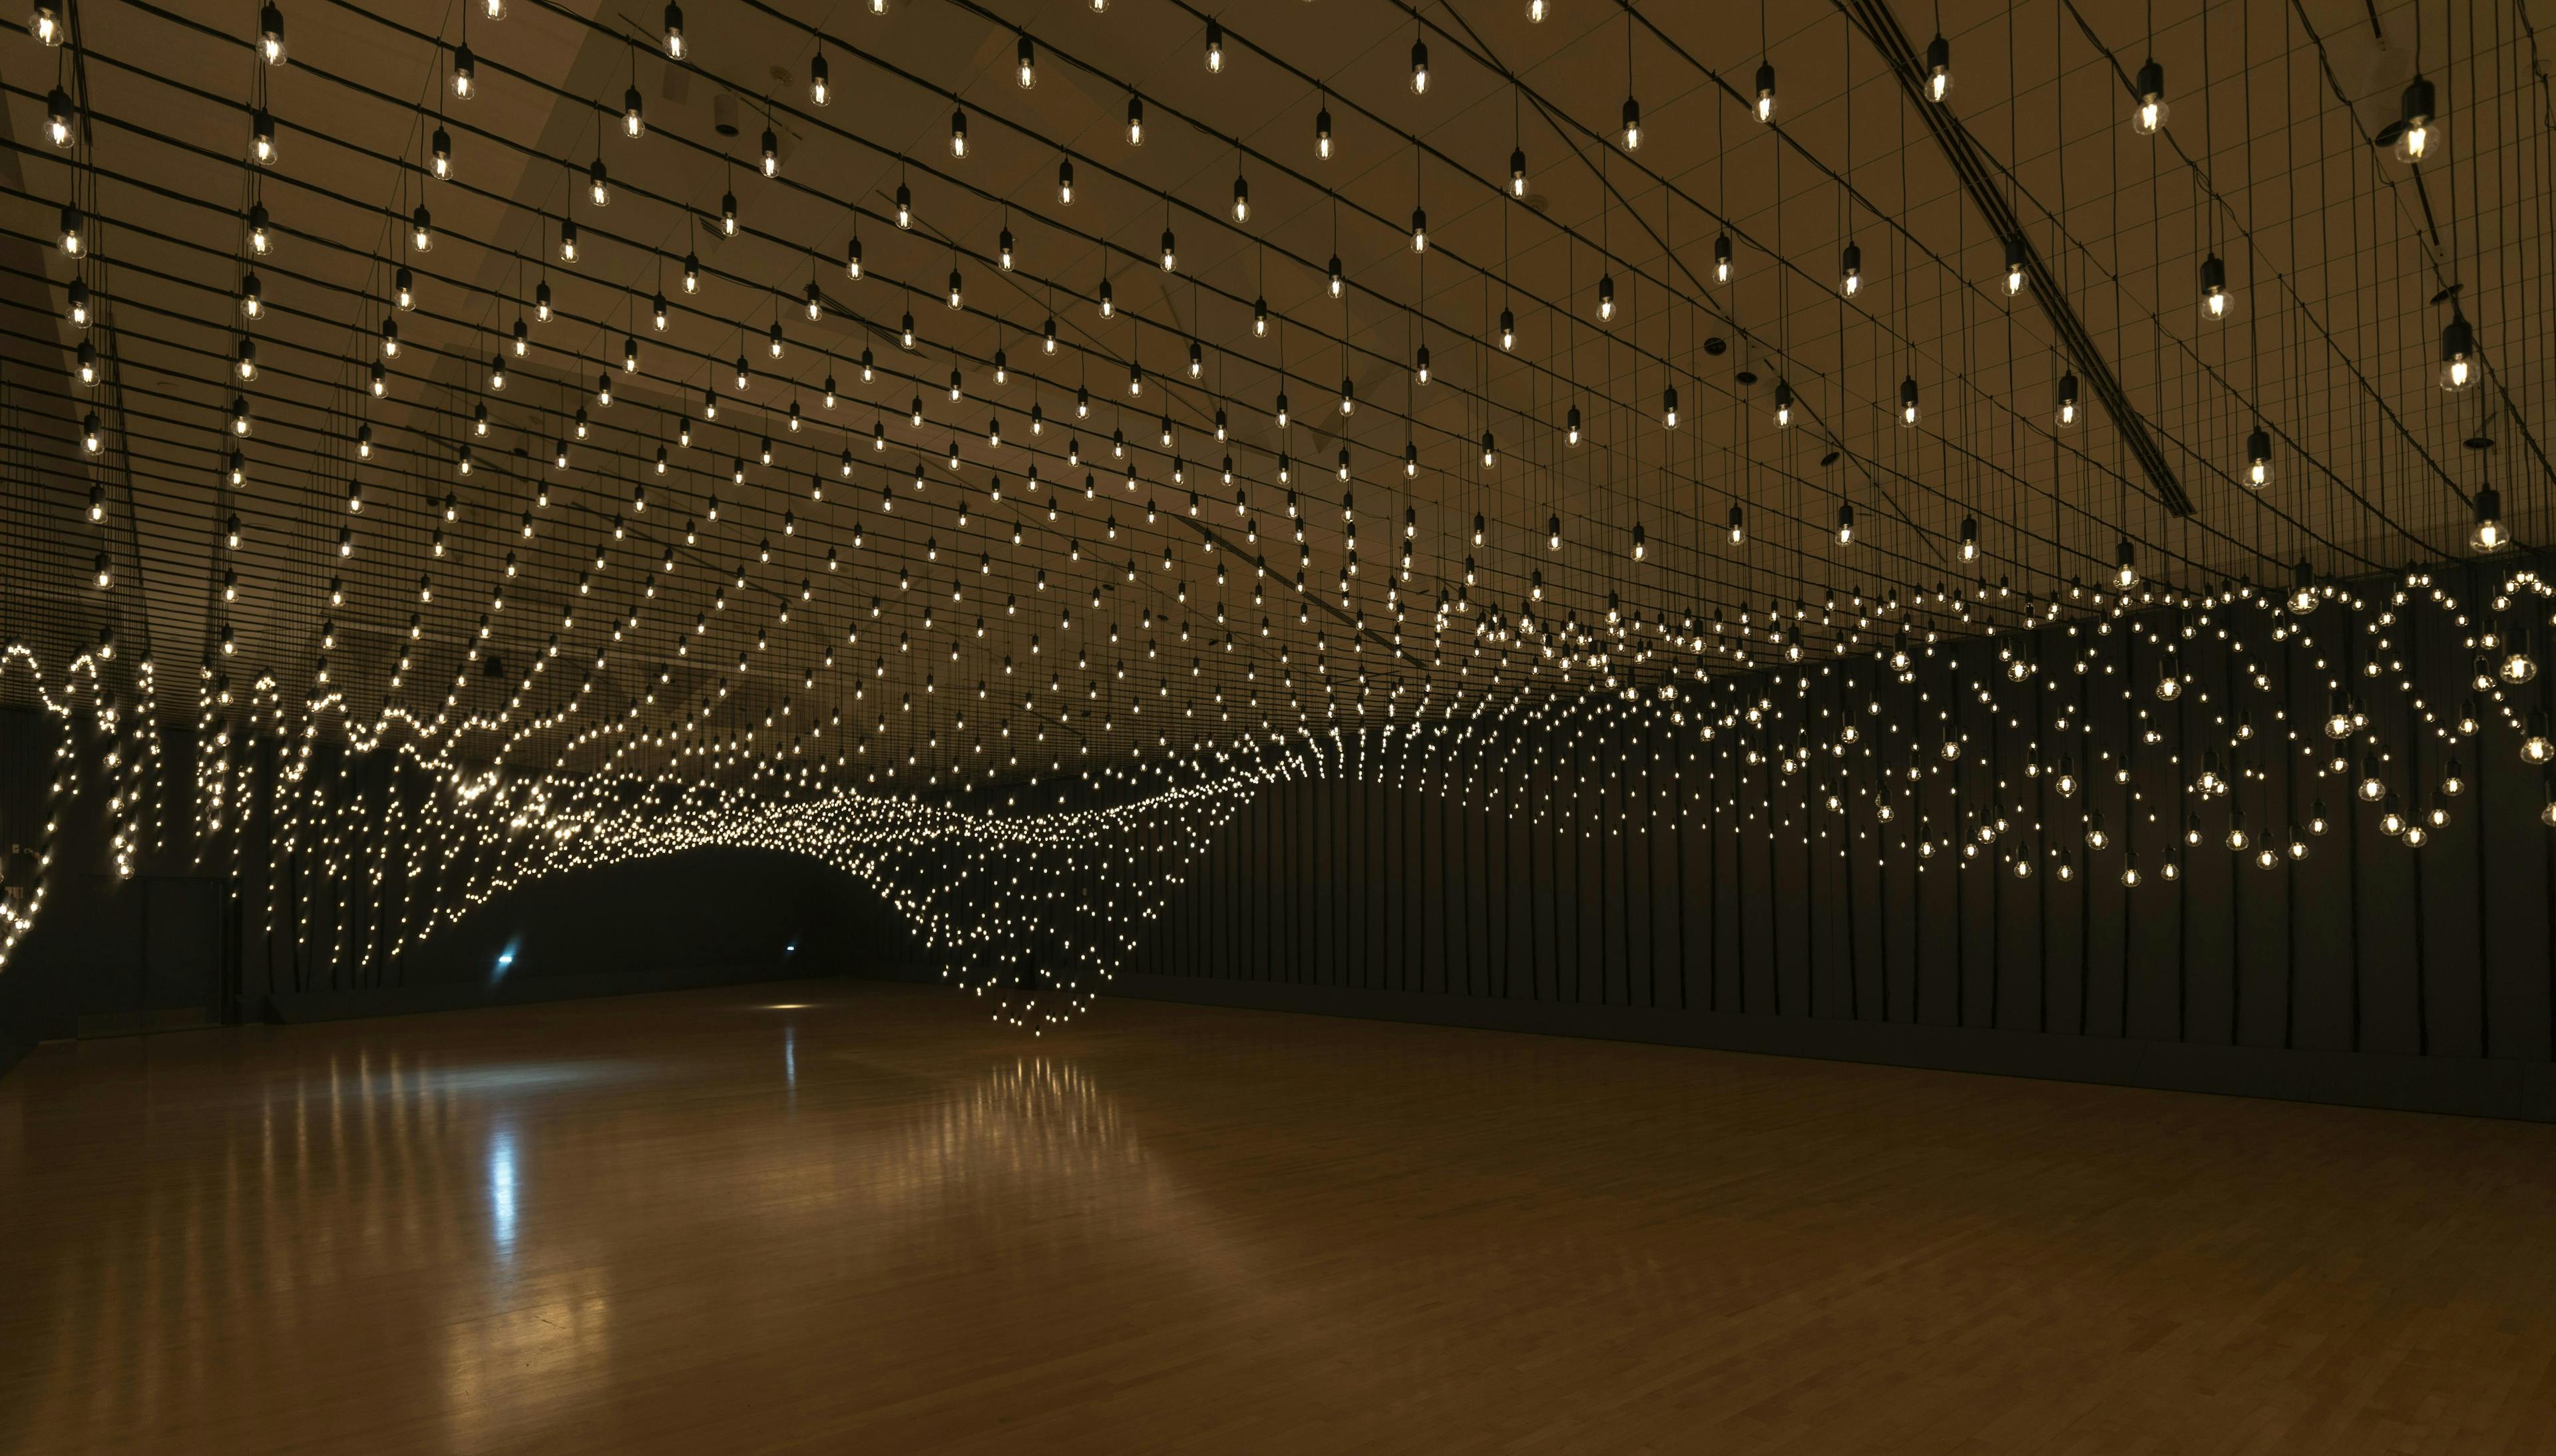 Hanging lights in an empty room.